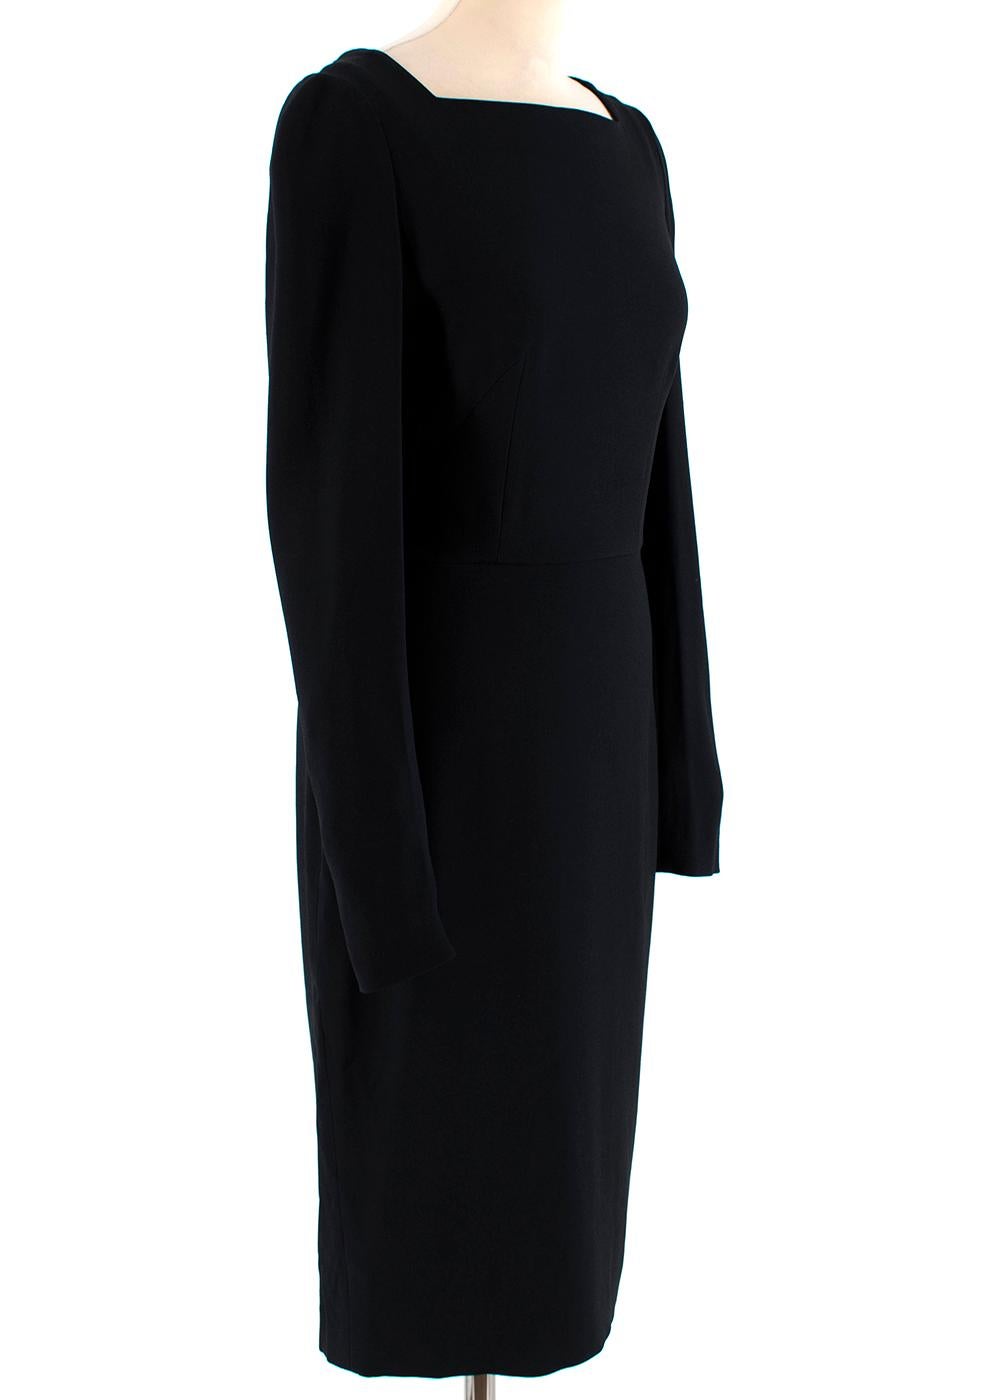 Tom Ford Black Keyhole Back Midi Fitted Dress

- Black fitted dress
- Cut-out keyhole back with gold ring 
- Square neck
- Darted front 
- Midi-length
- Long sleeves
- Back slit
- Concealed side zip fastening
- Fully lined with silk